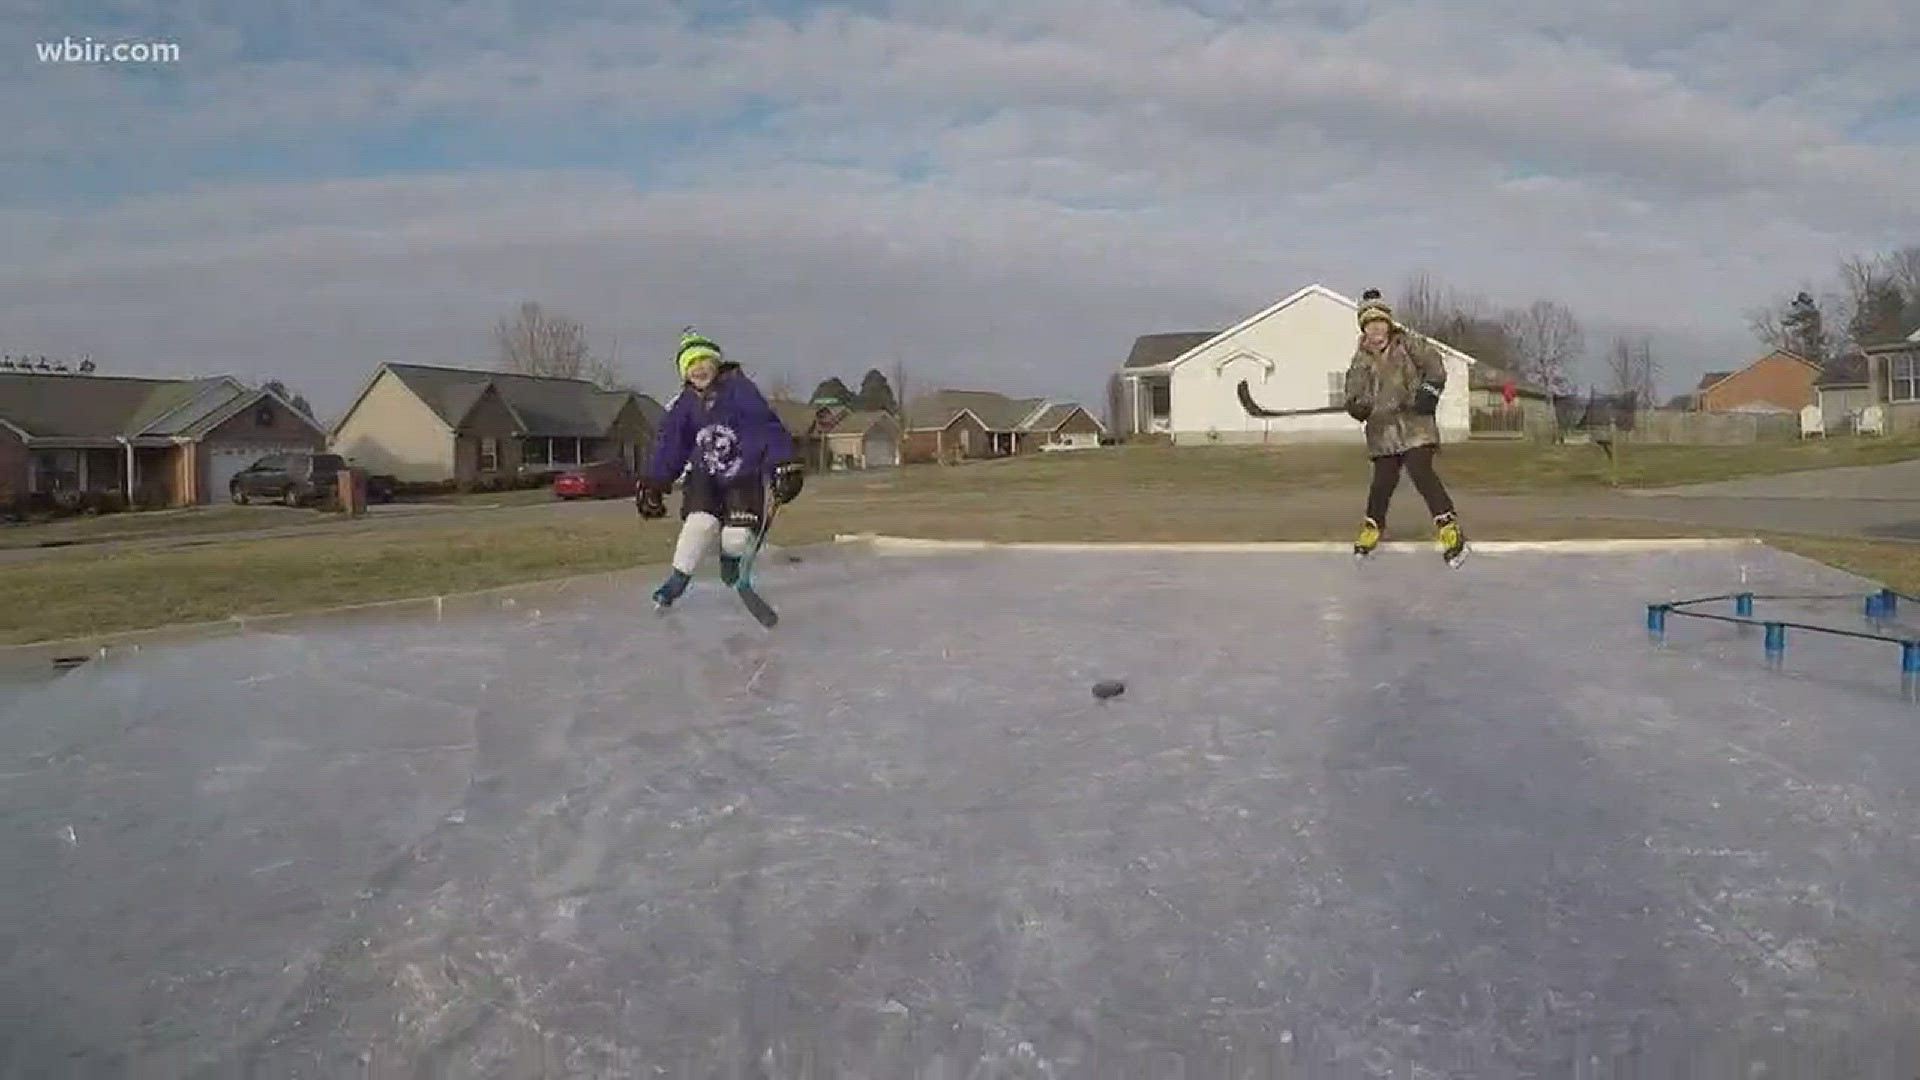 Jan. 5, 2018: Two Tennessee dads took advantage of the freezing temperatures to build their own ice skating rink.